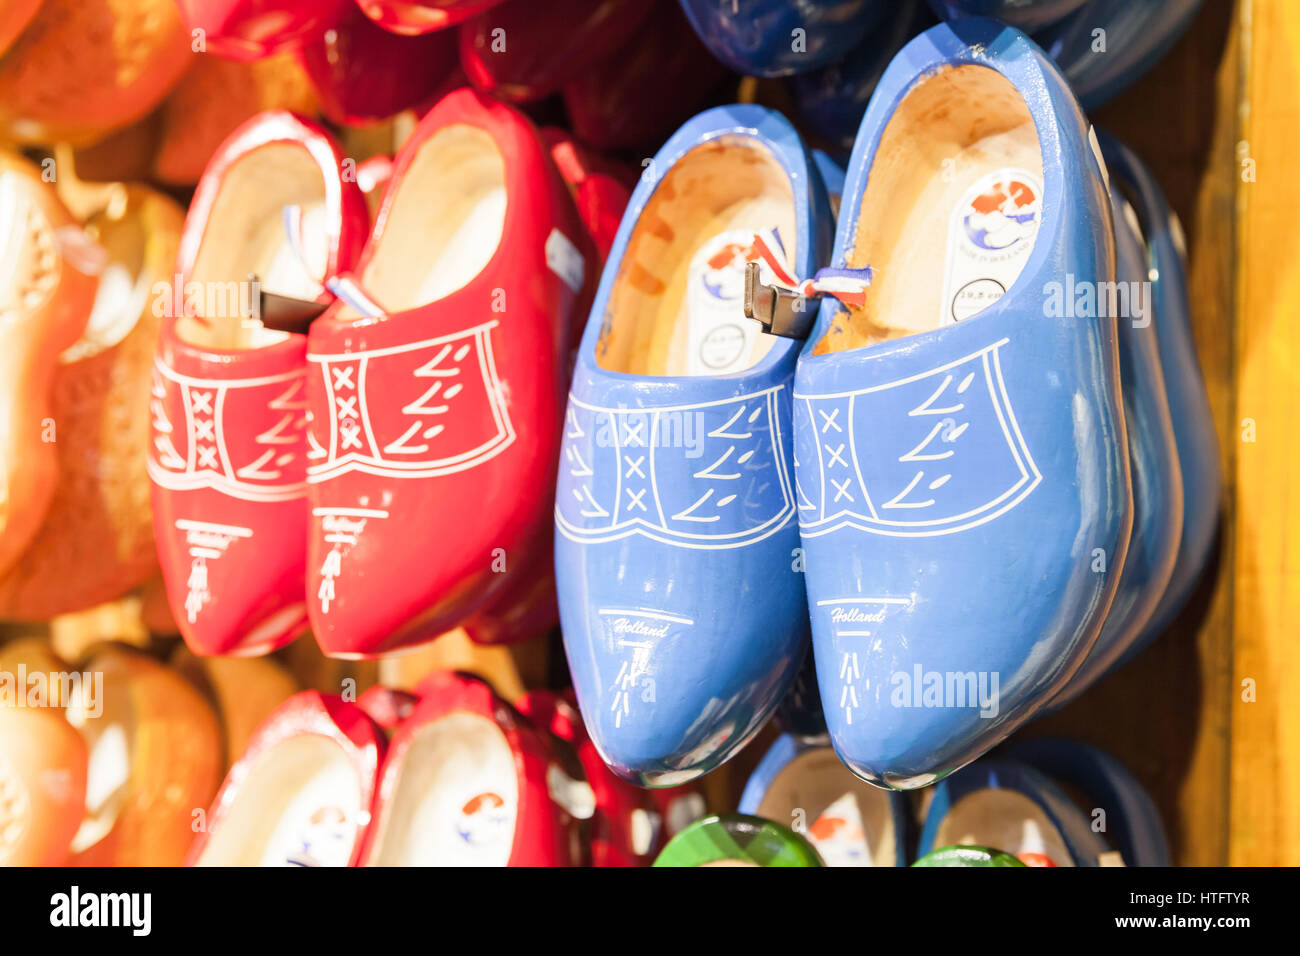 Zaanse Schans, Netherlands - February 25: Dutch clogs made of poplar wood, traditional shoes for everyday use stand on souvenir shop counter Stock Photo